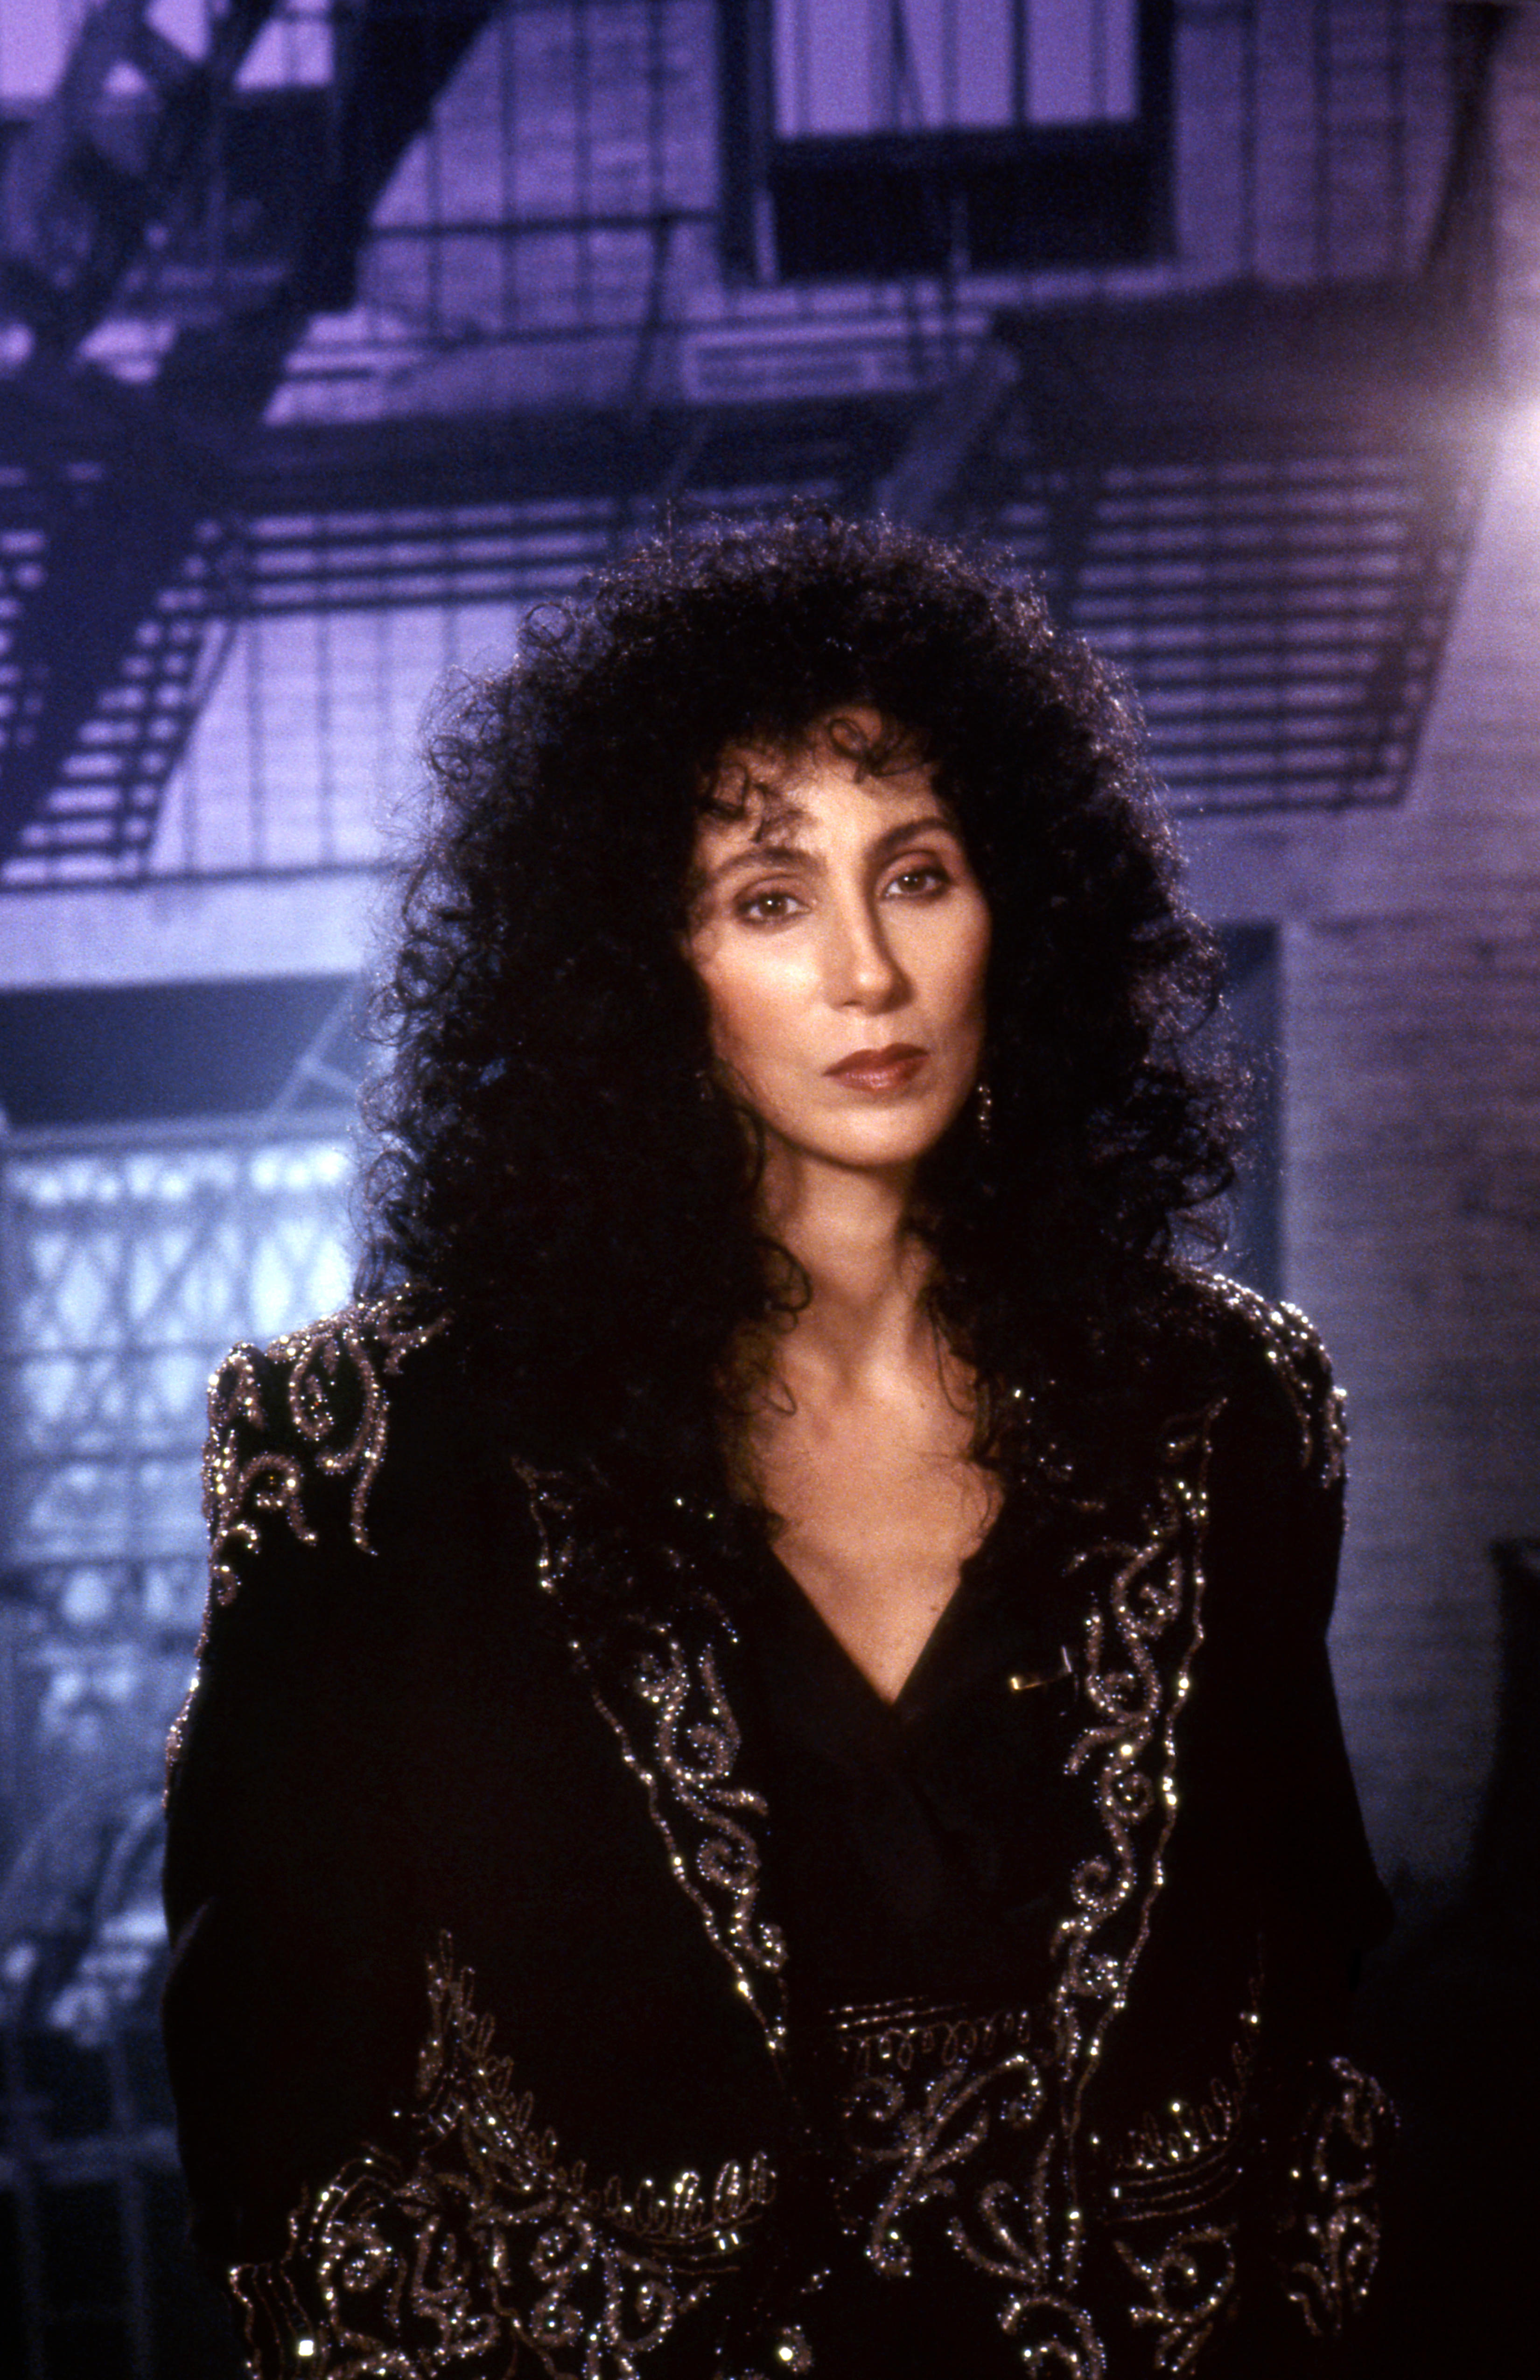 Cher performing at Comic Relief benefit circa 1986